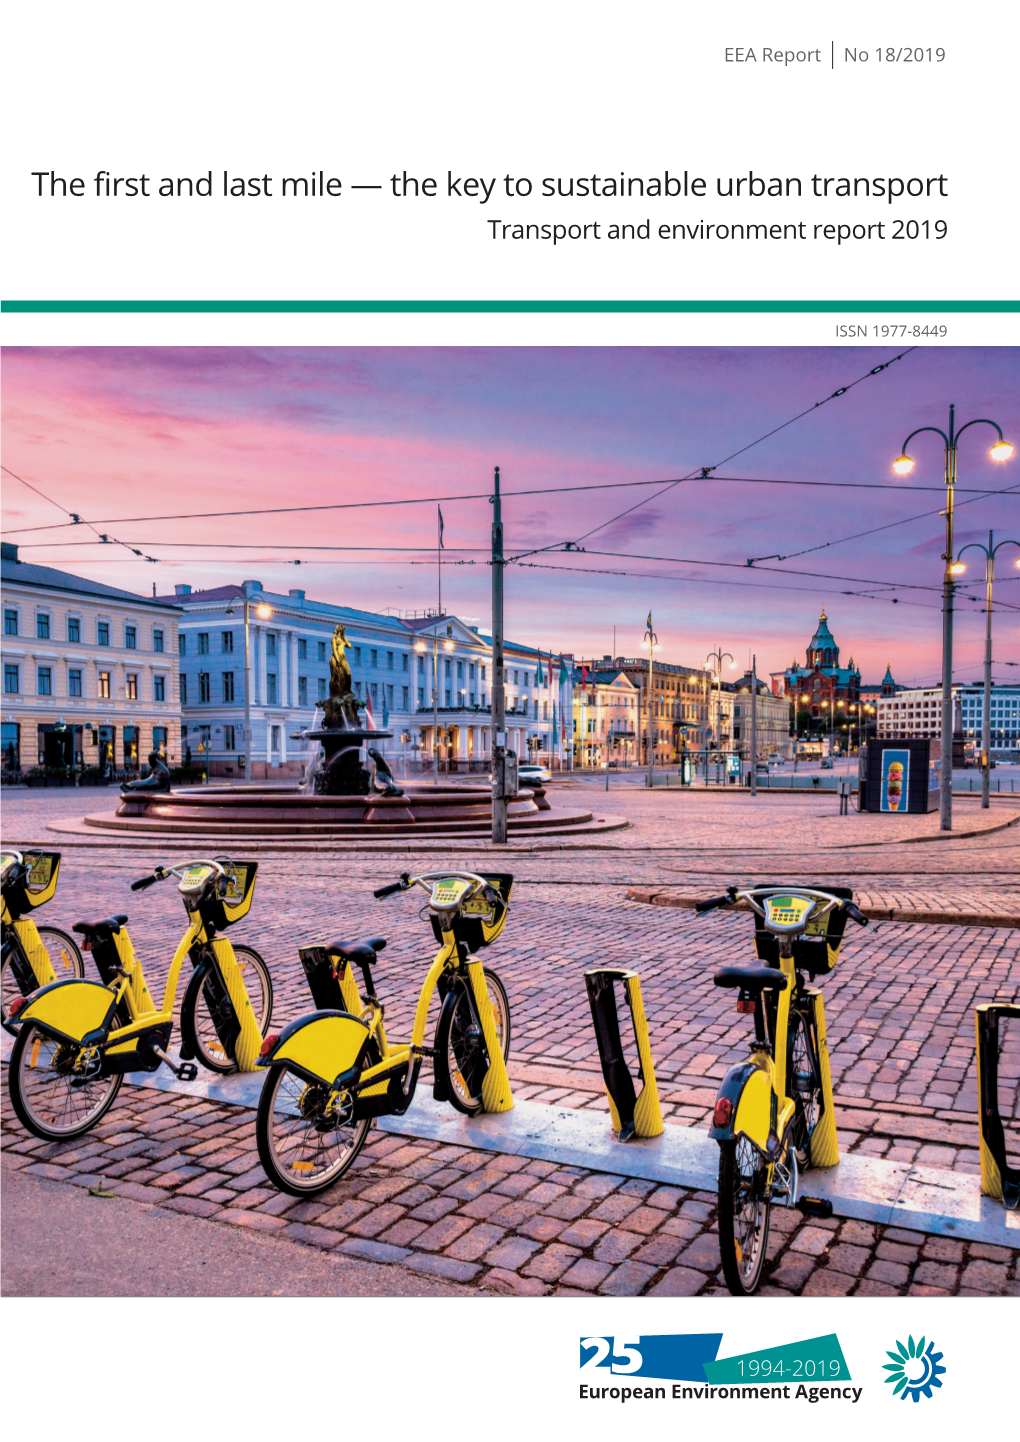 The First and Last Mile — the Key to Sustainable Urban Transport. Transport and Environment Report 2019